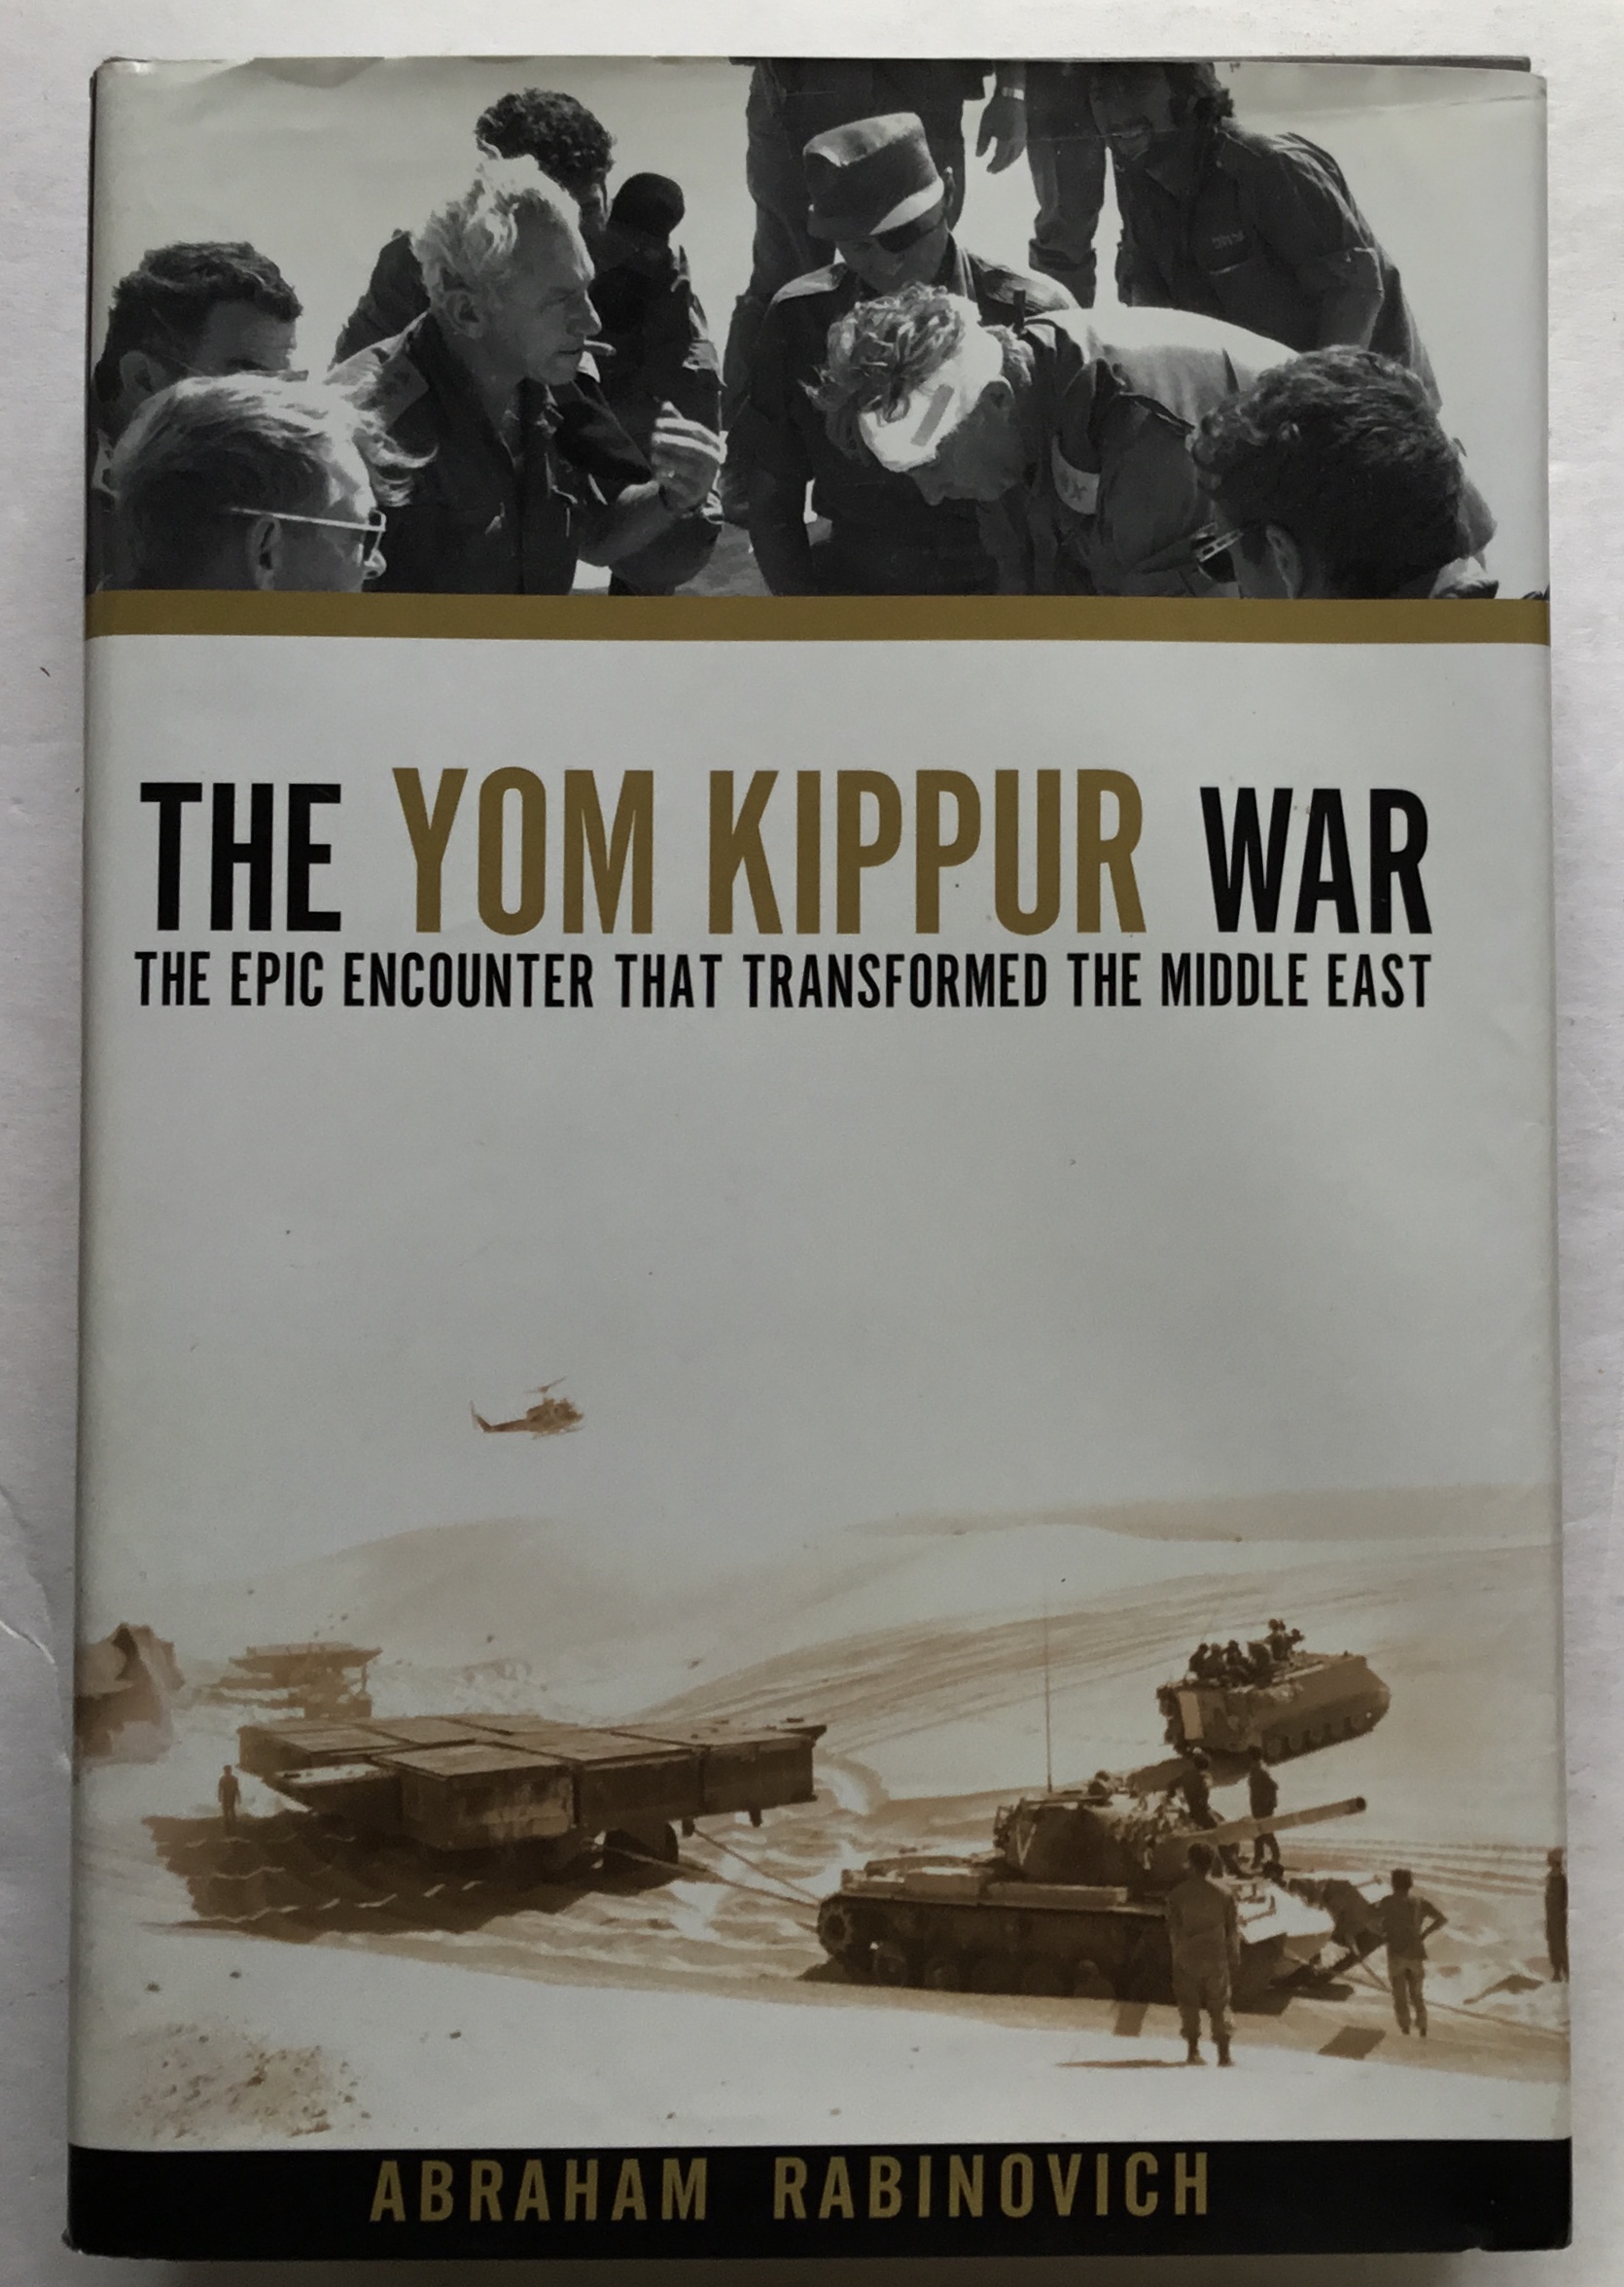 The Yom Kippur War: The Epic Encounter that Transformed the Middle East. - Abraham Rabinovich.